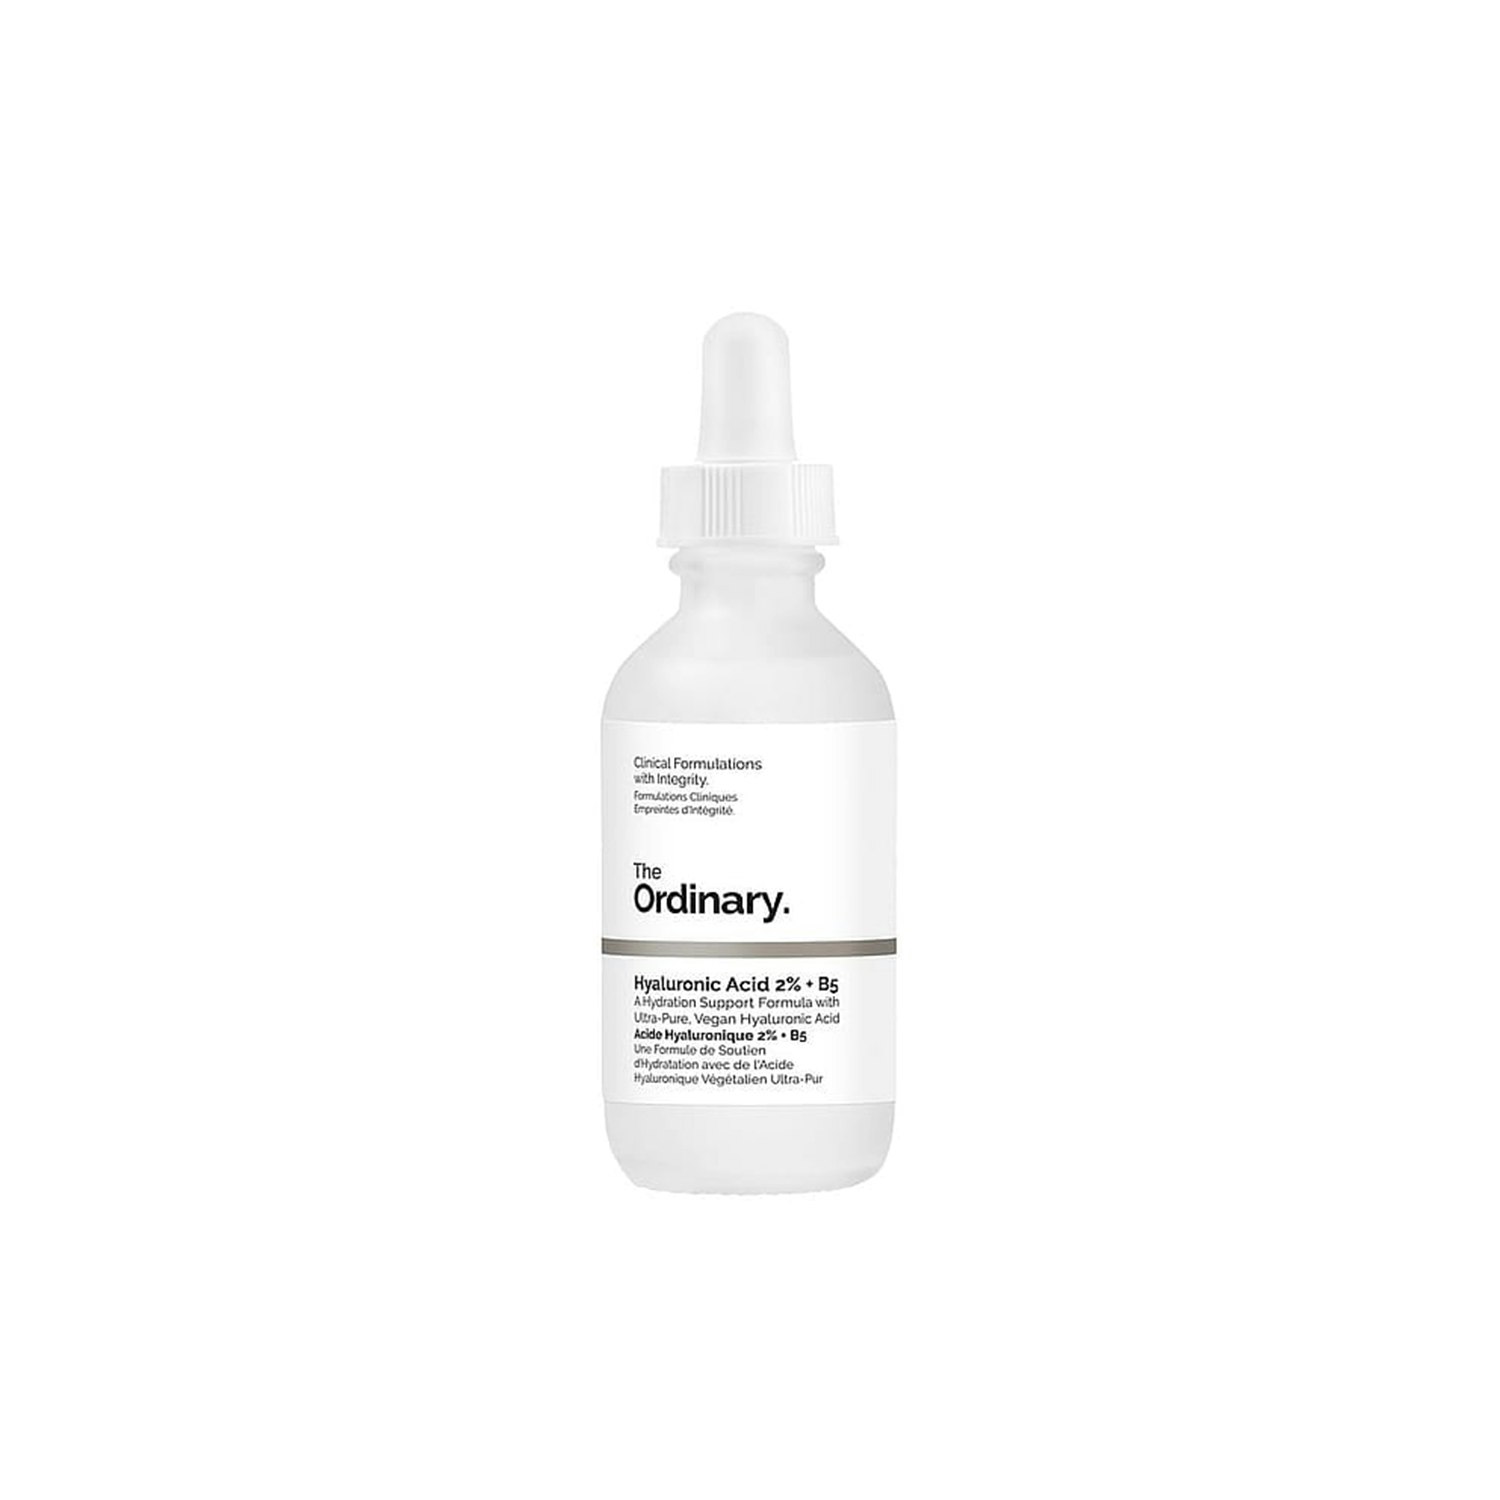 The Ordinary Hyaluronic 2%+B5